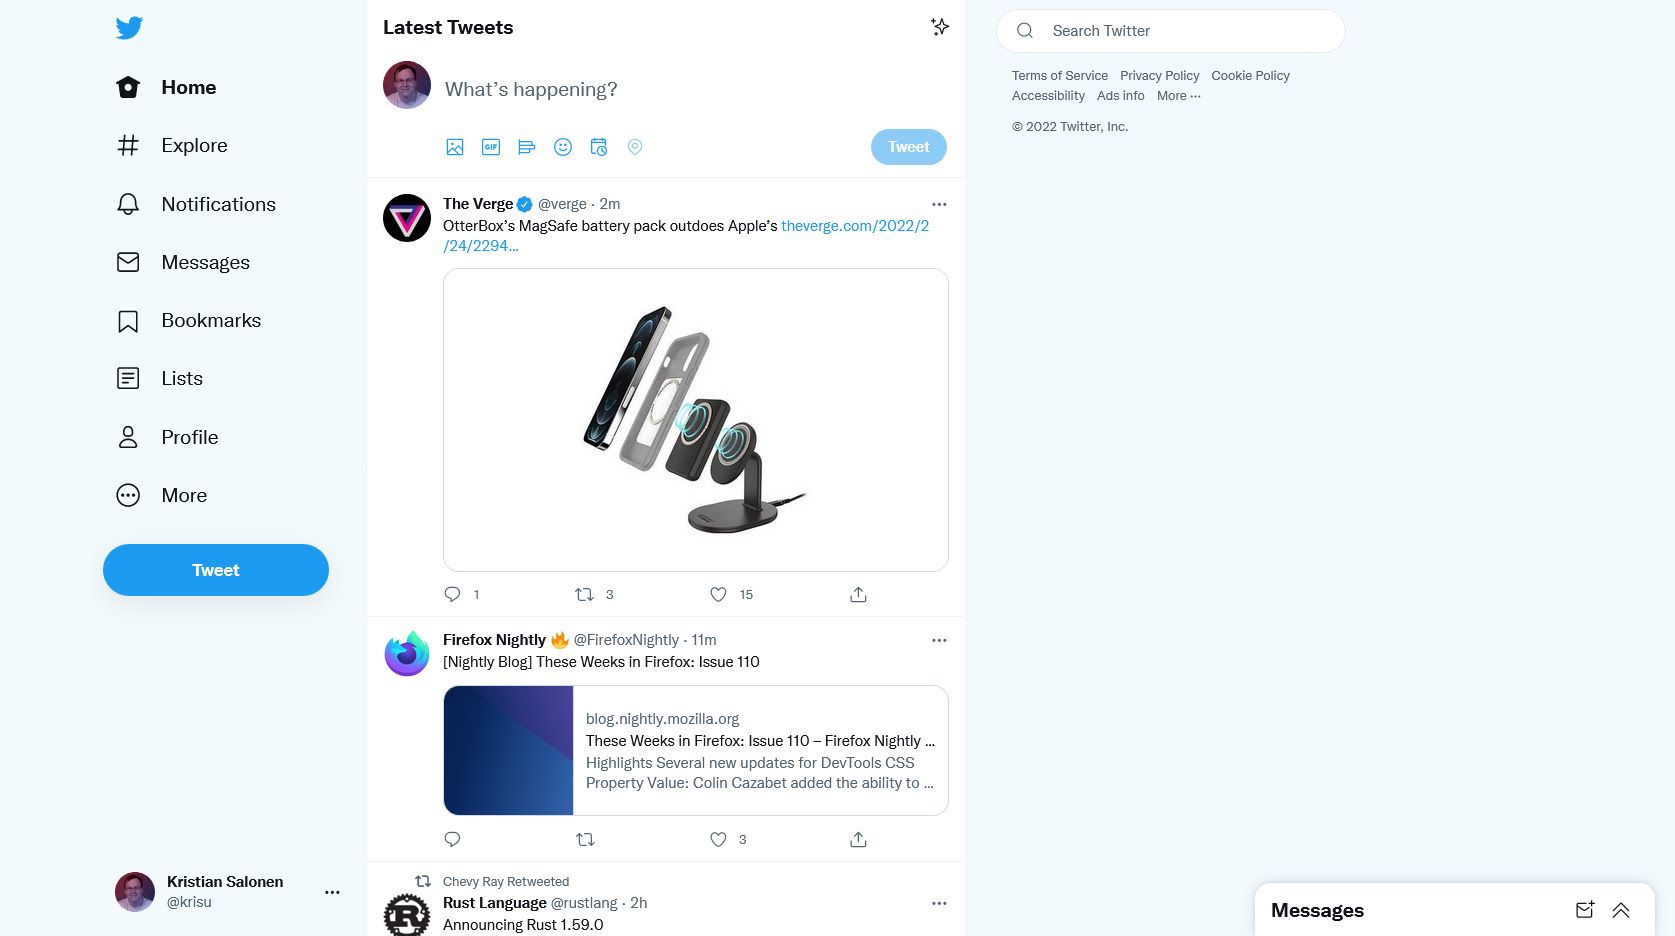 Screenshot of Twitter - Clean 2019 Design (Now With Light Blue)